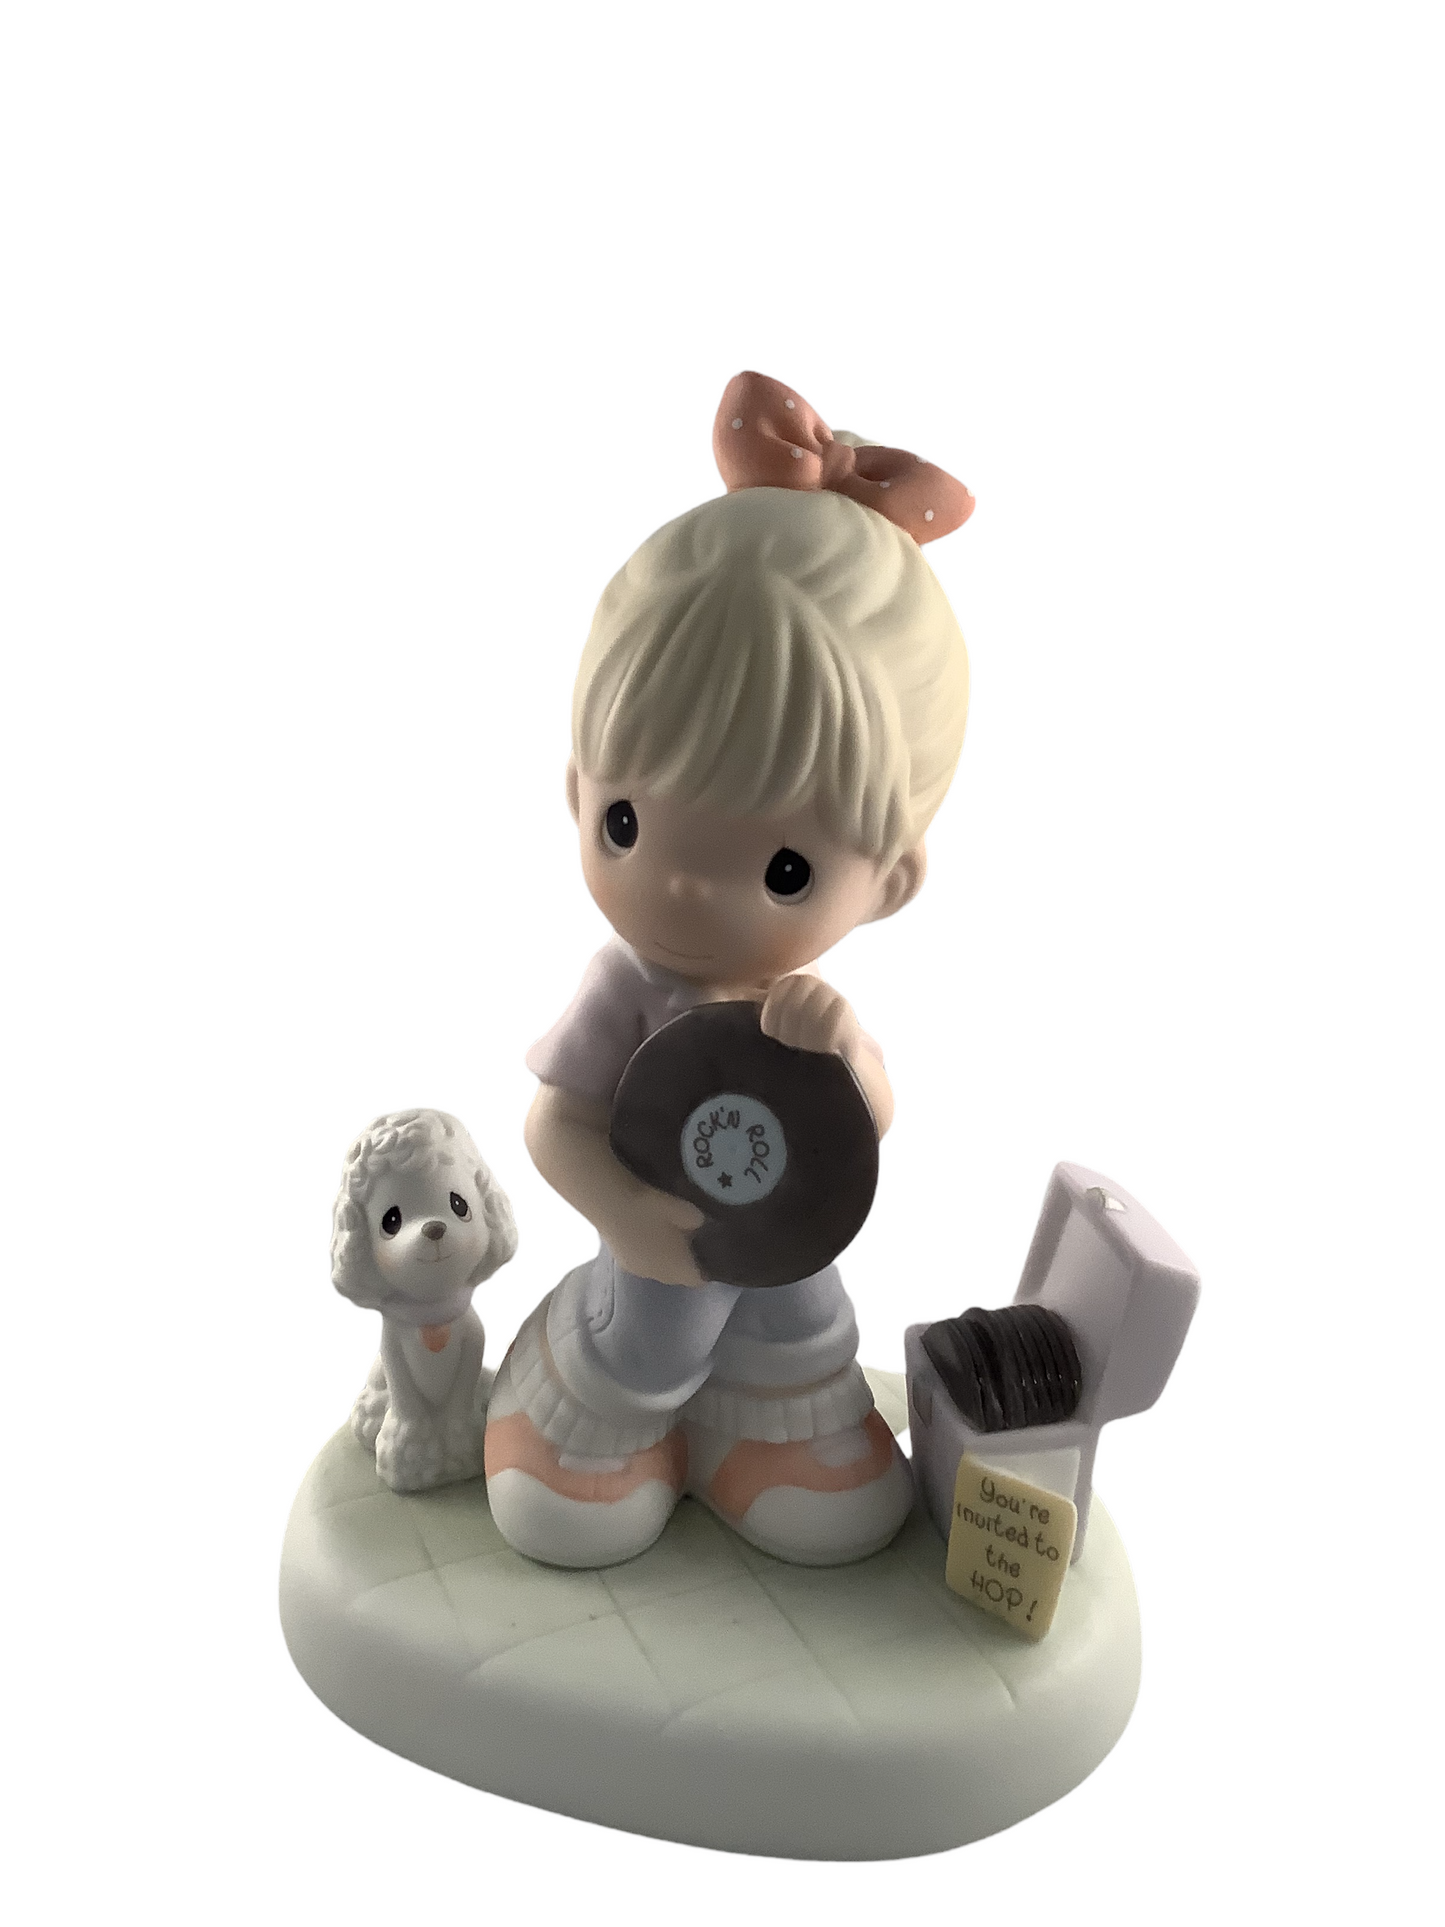 Hopping For The Best - Precious Moment Figurine